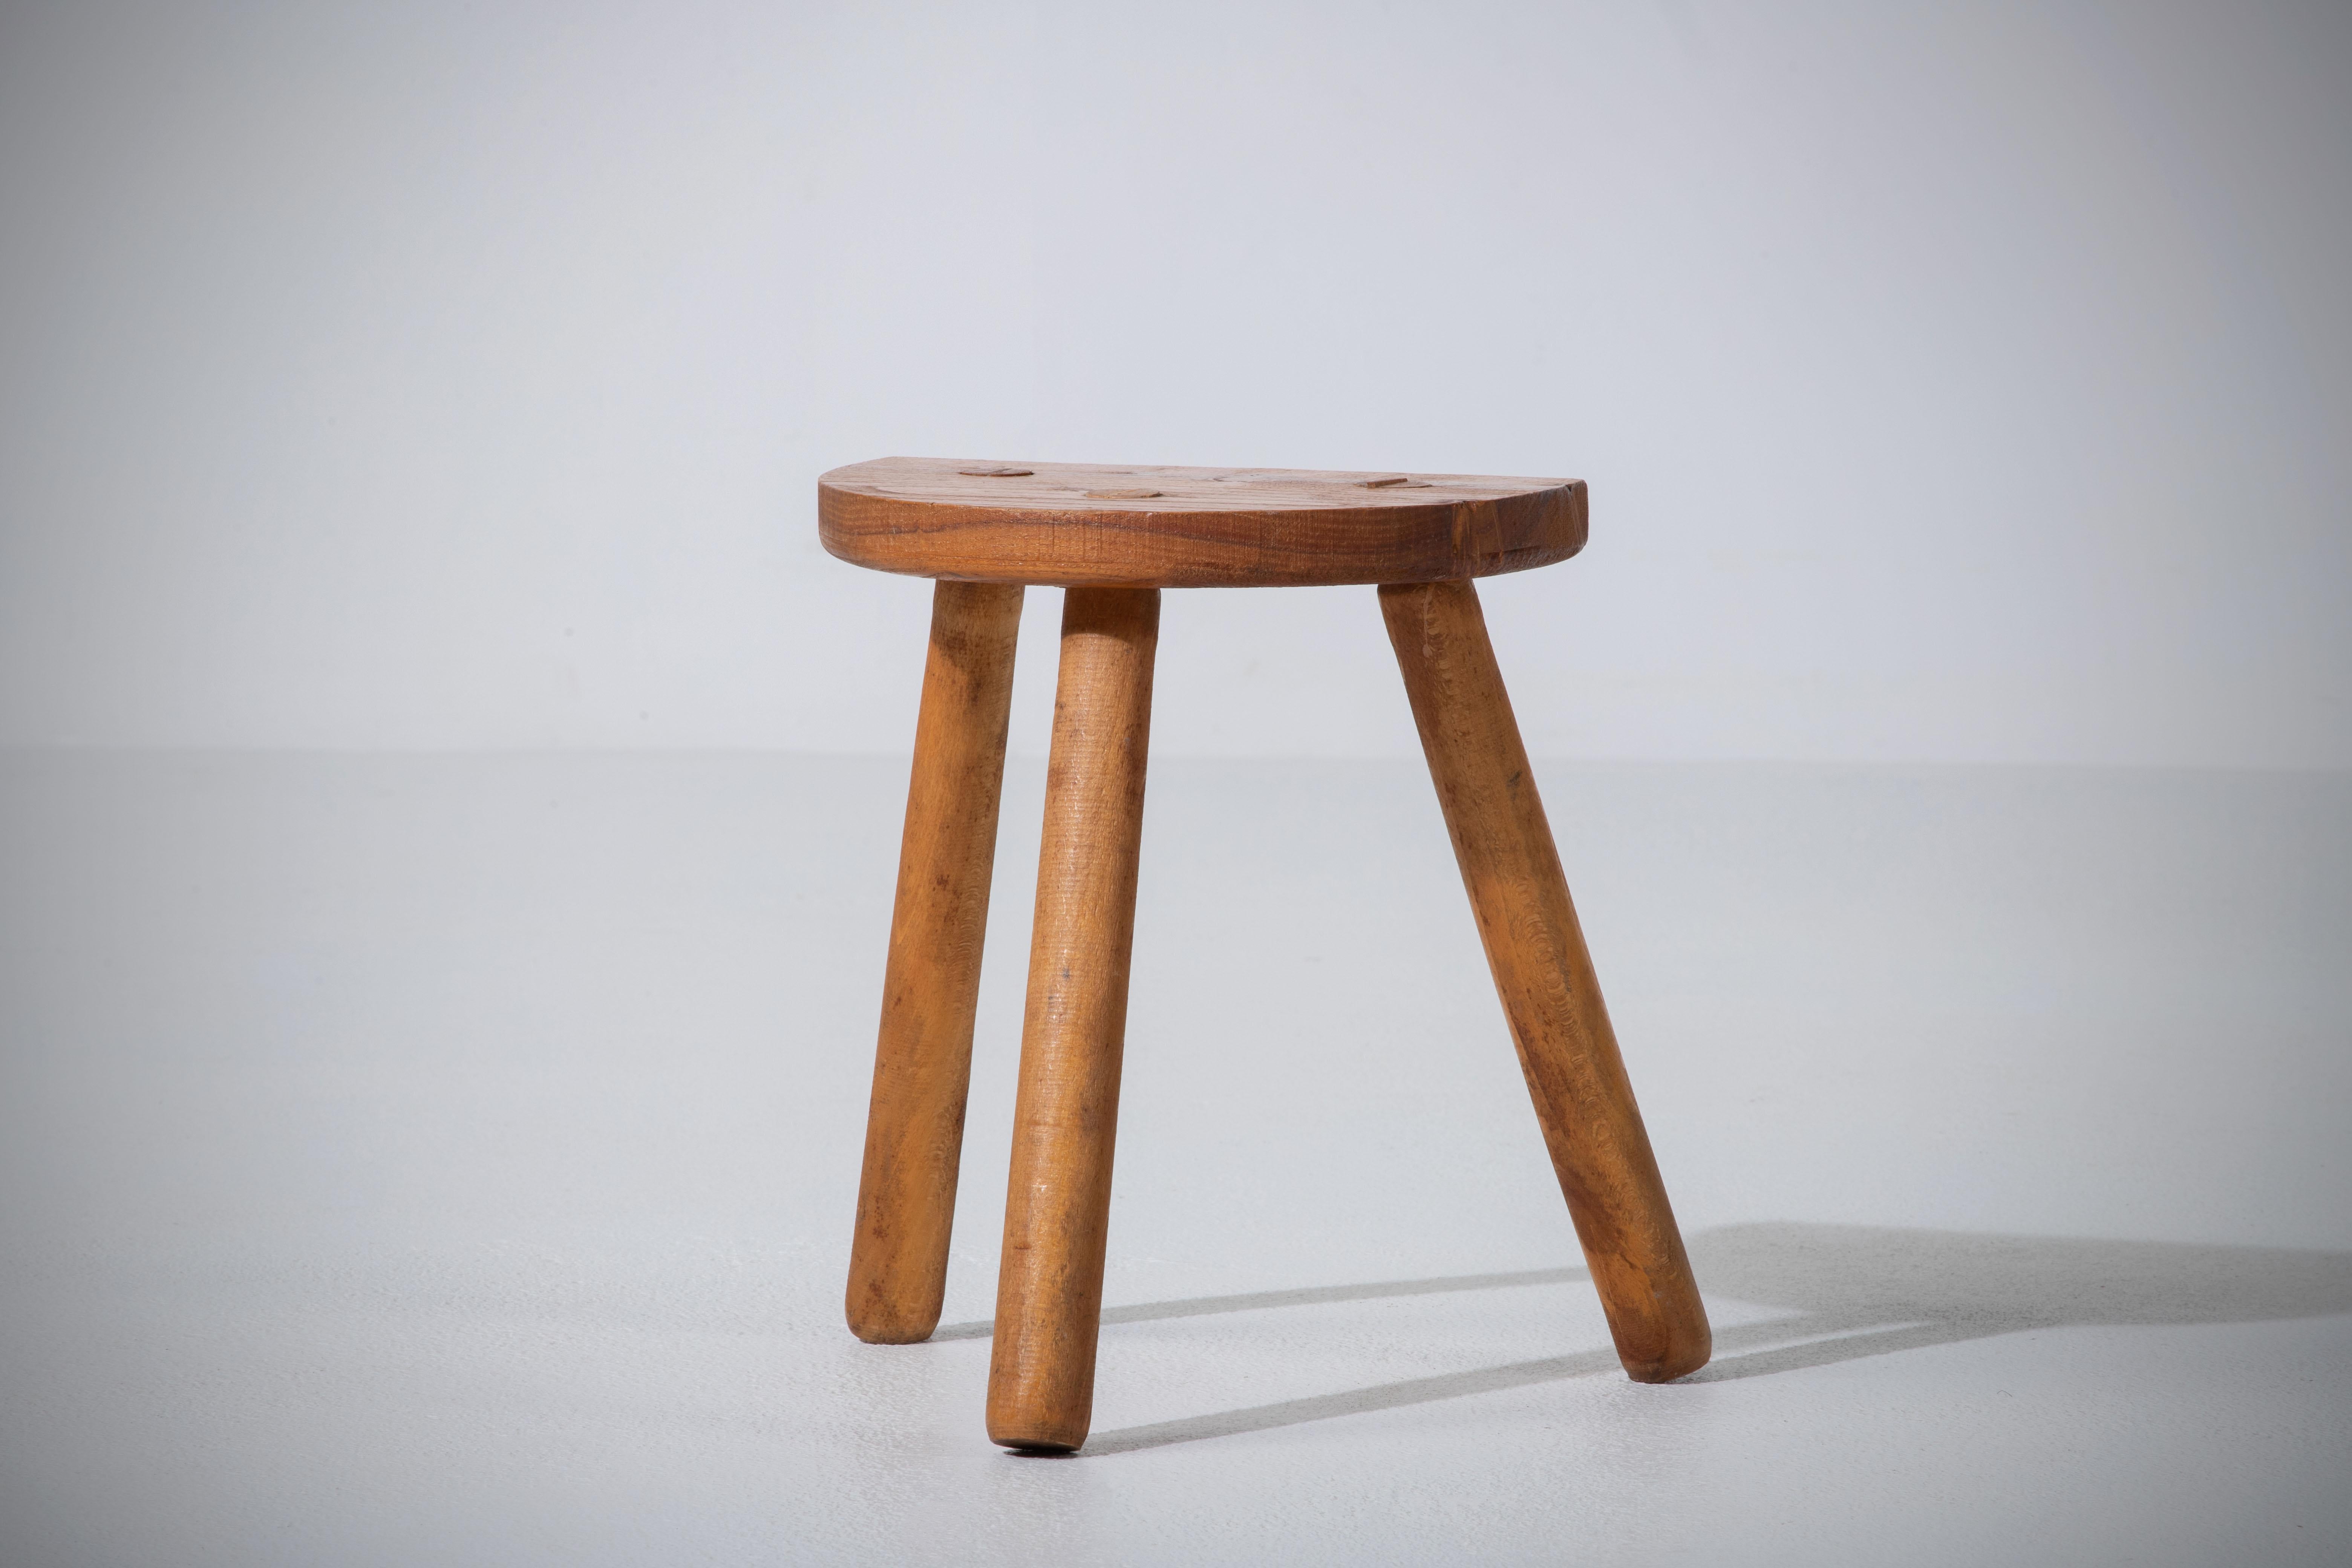 Fantastic wood stool from France. Made in the 1960s, without hardware. Lovely Vintage look.
Good vintage condition.